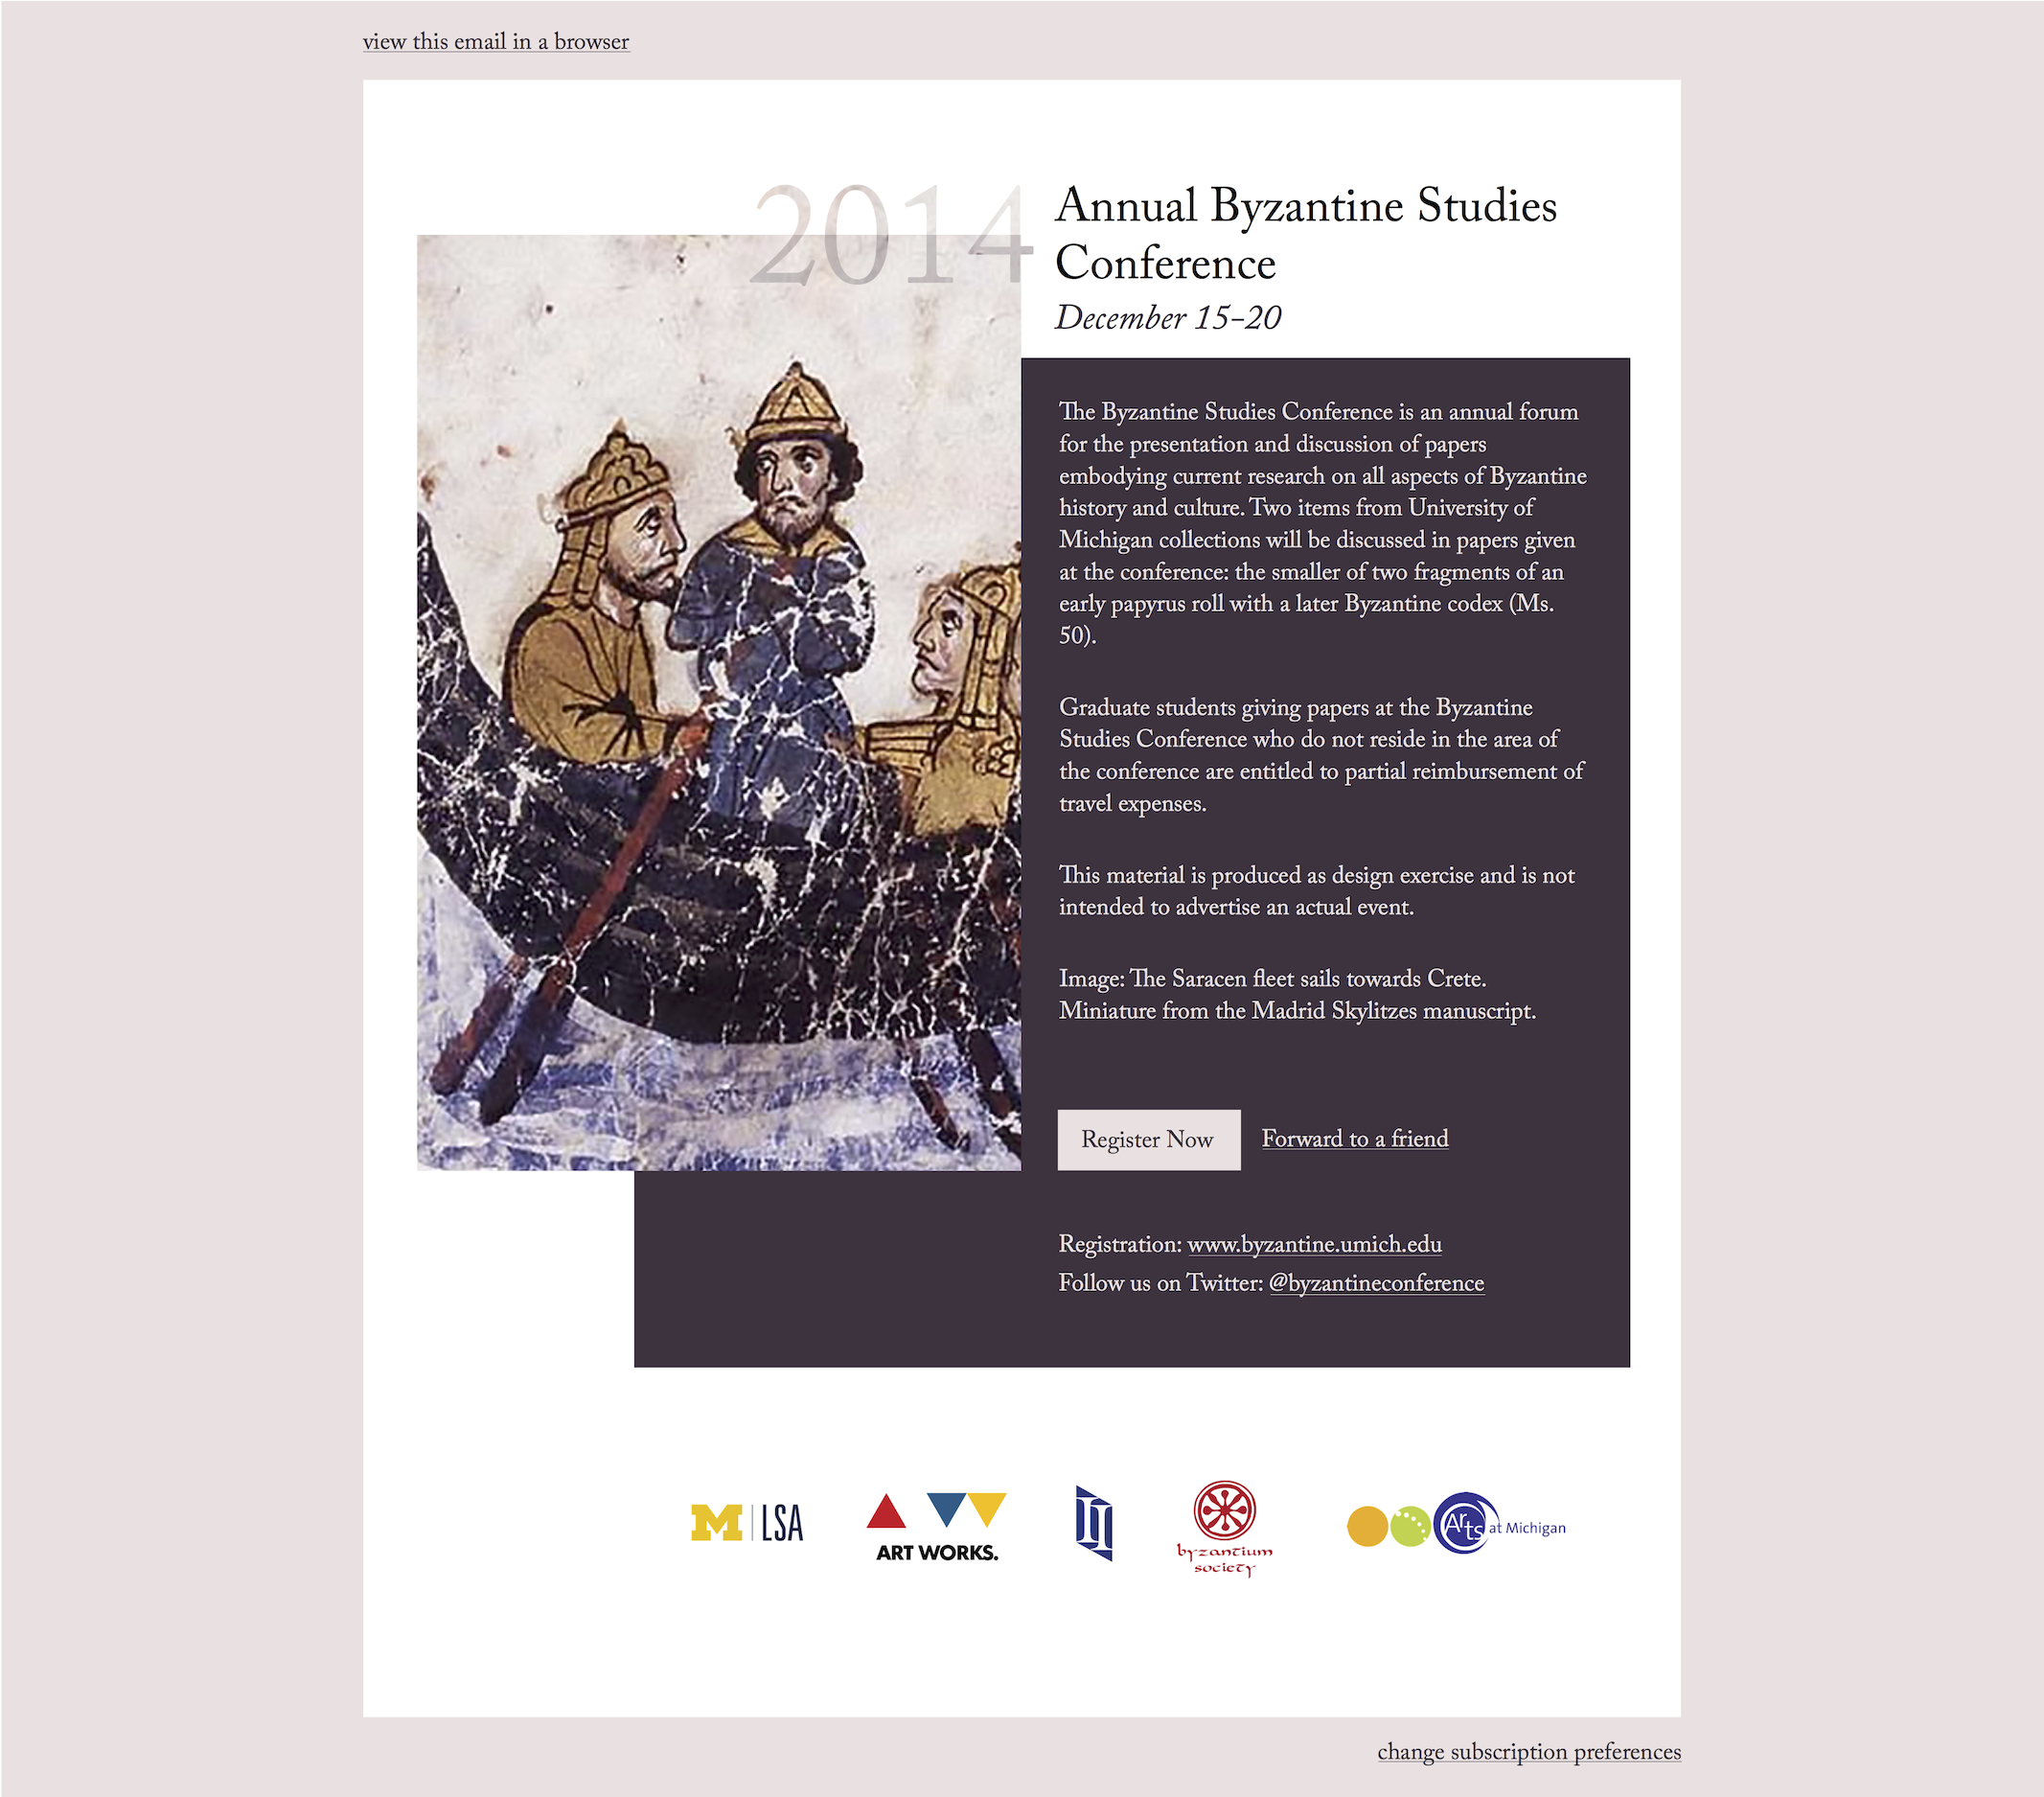 Email Invite to the Annual Byzantine Studies Conference